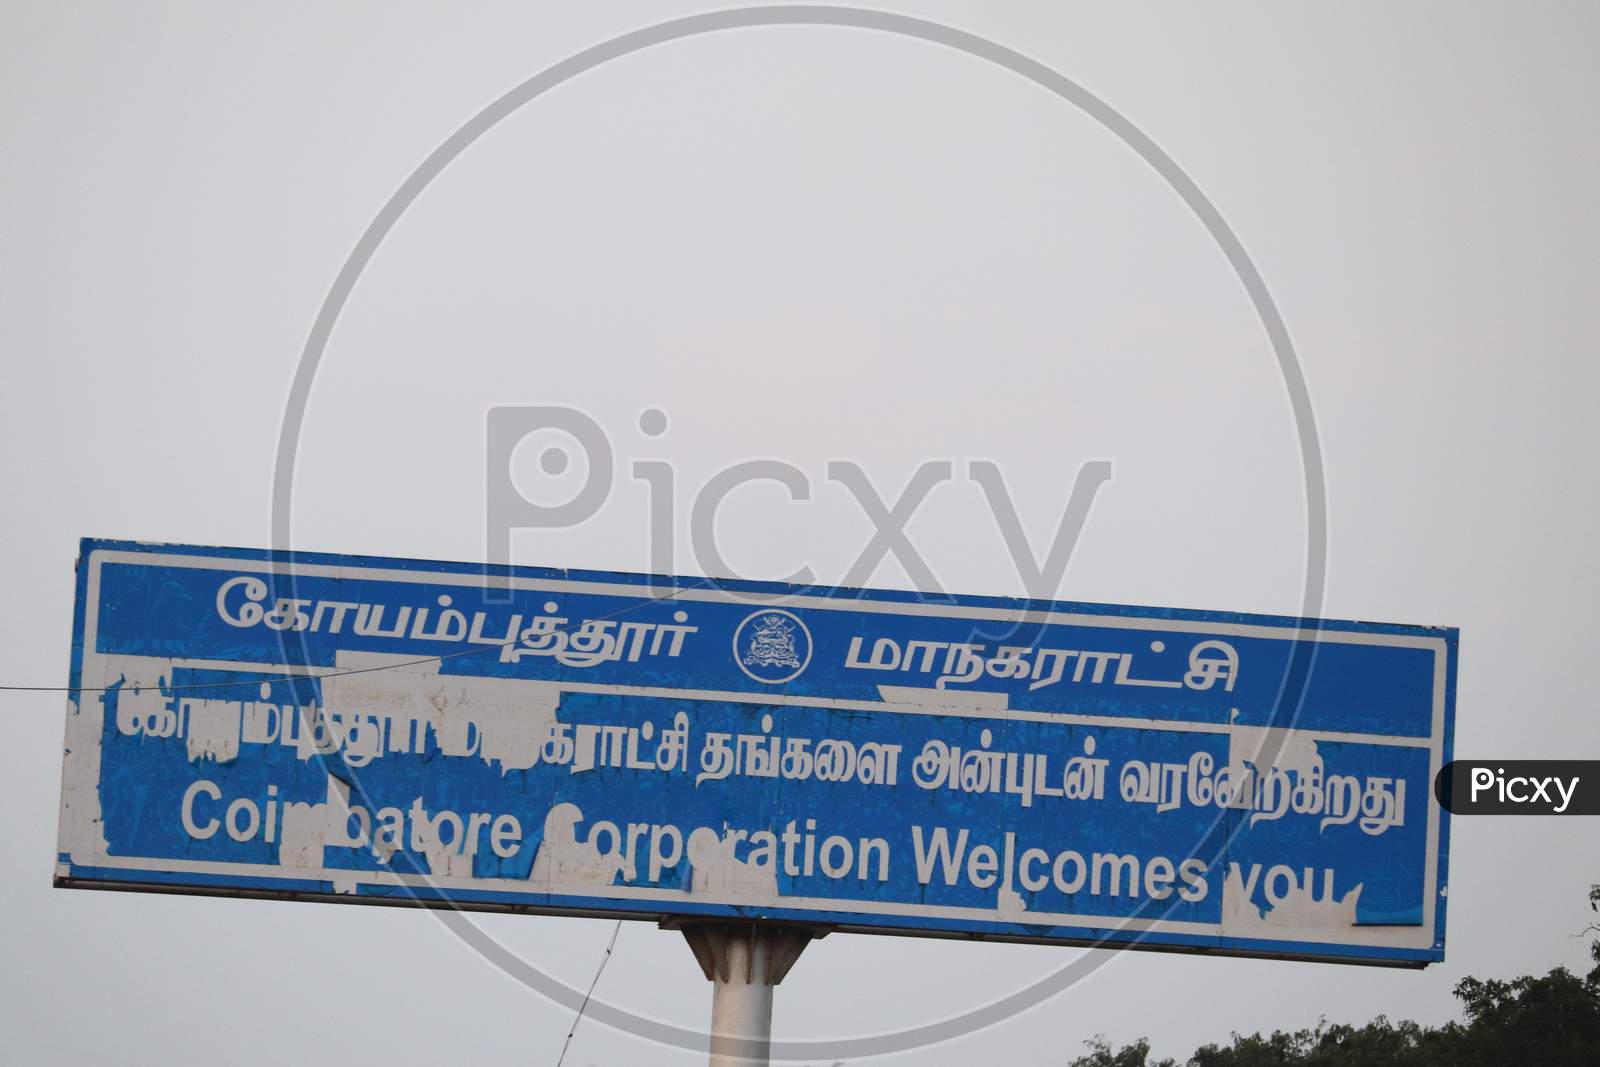 Street  boards   in Coimbatore  corporation  welcomes you both tamil and English  languages